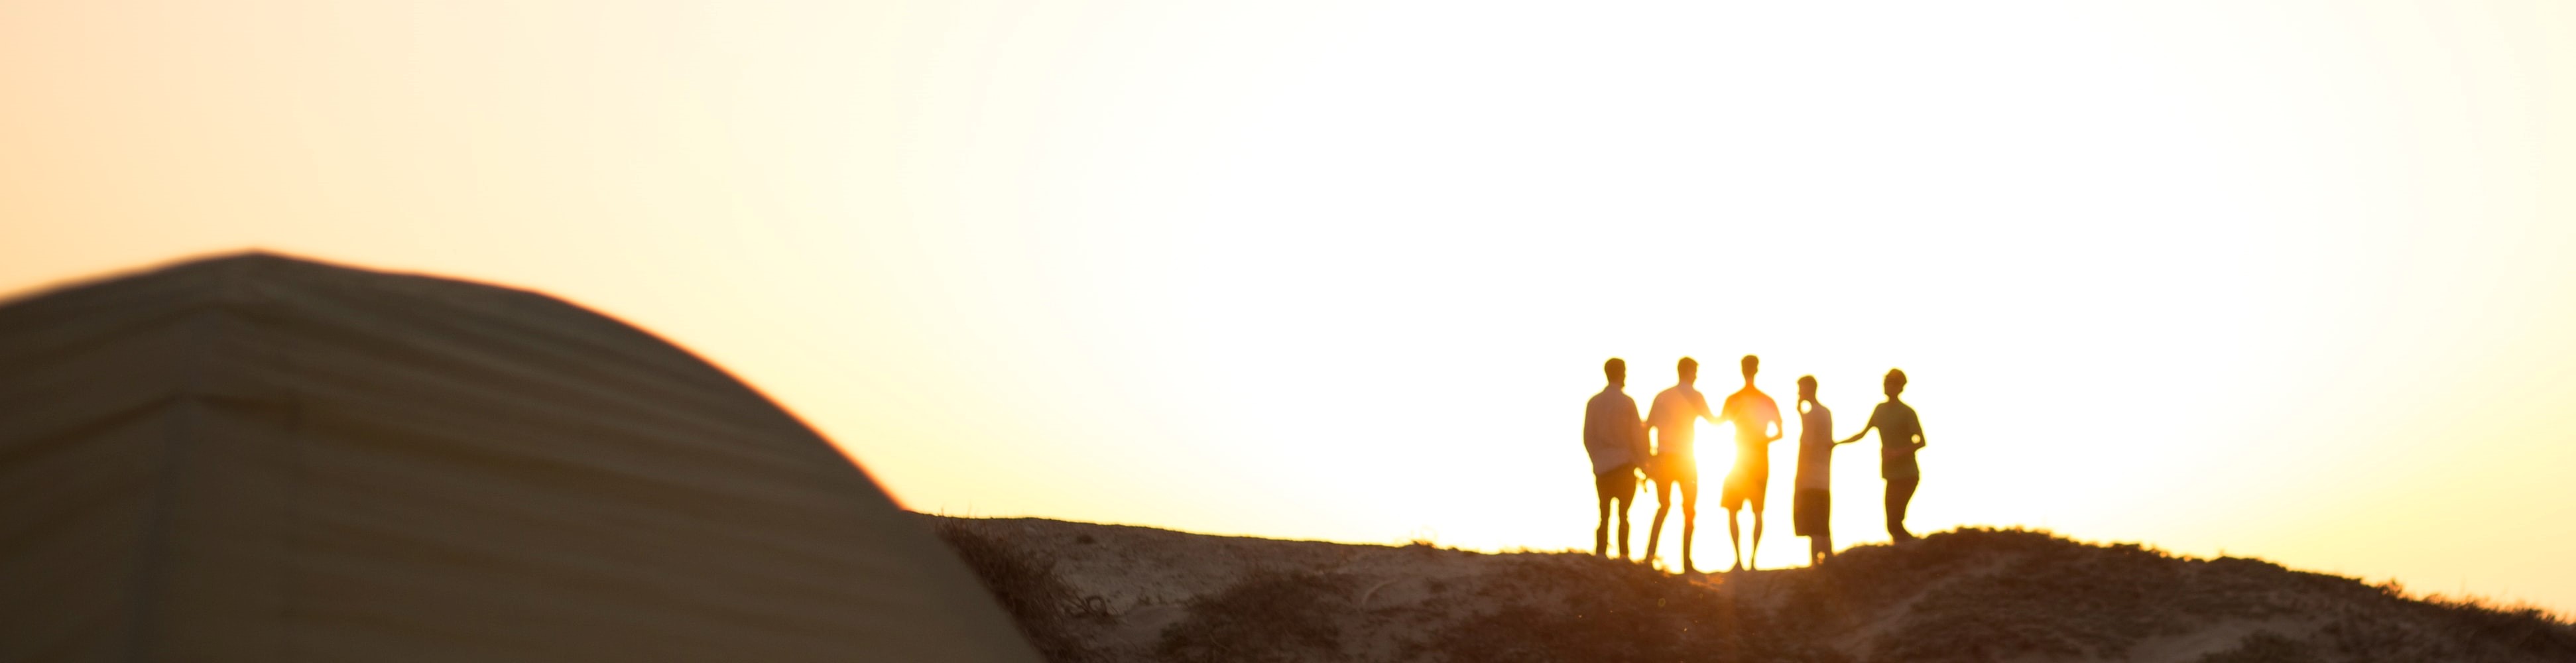 silhouette of friends standing on a hill during sunset 